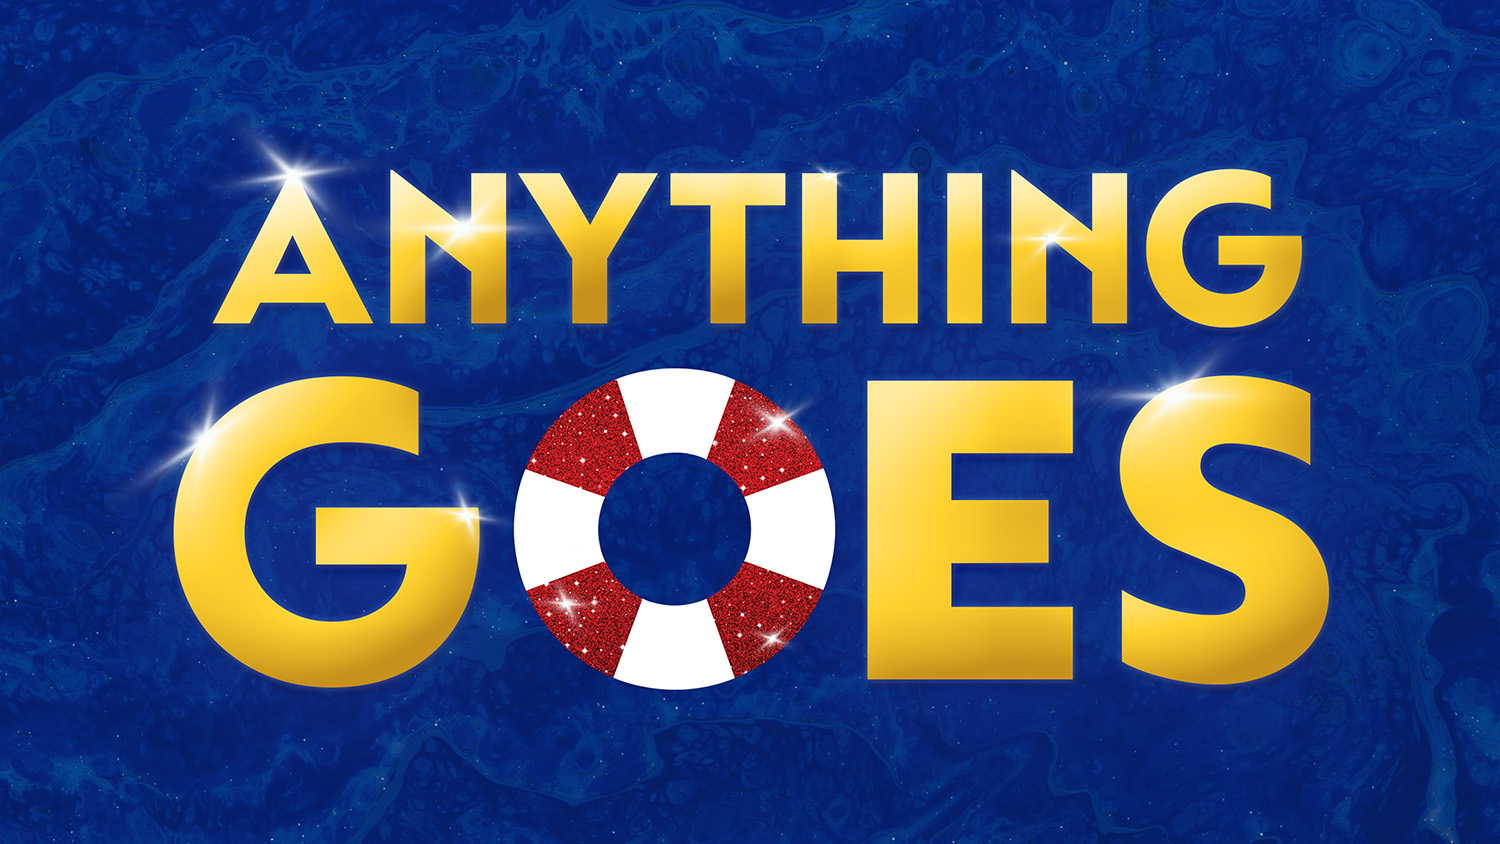 Logo for Anything Goes. The words in gold lettering hang above an image of ocean waves.